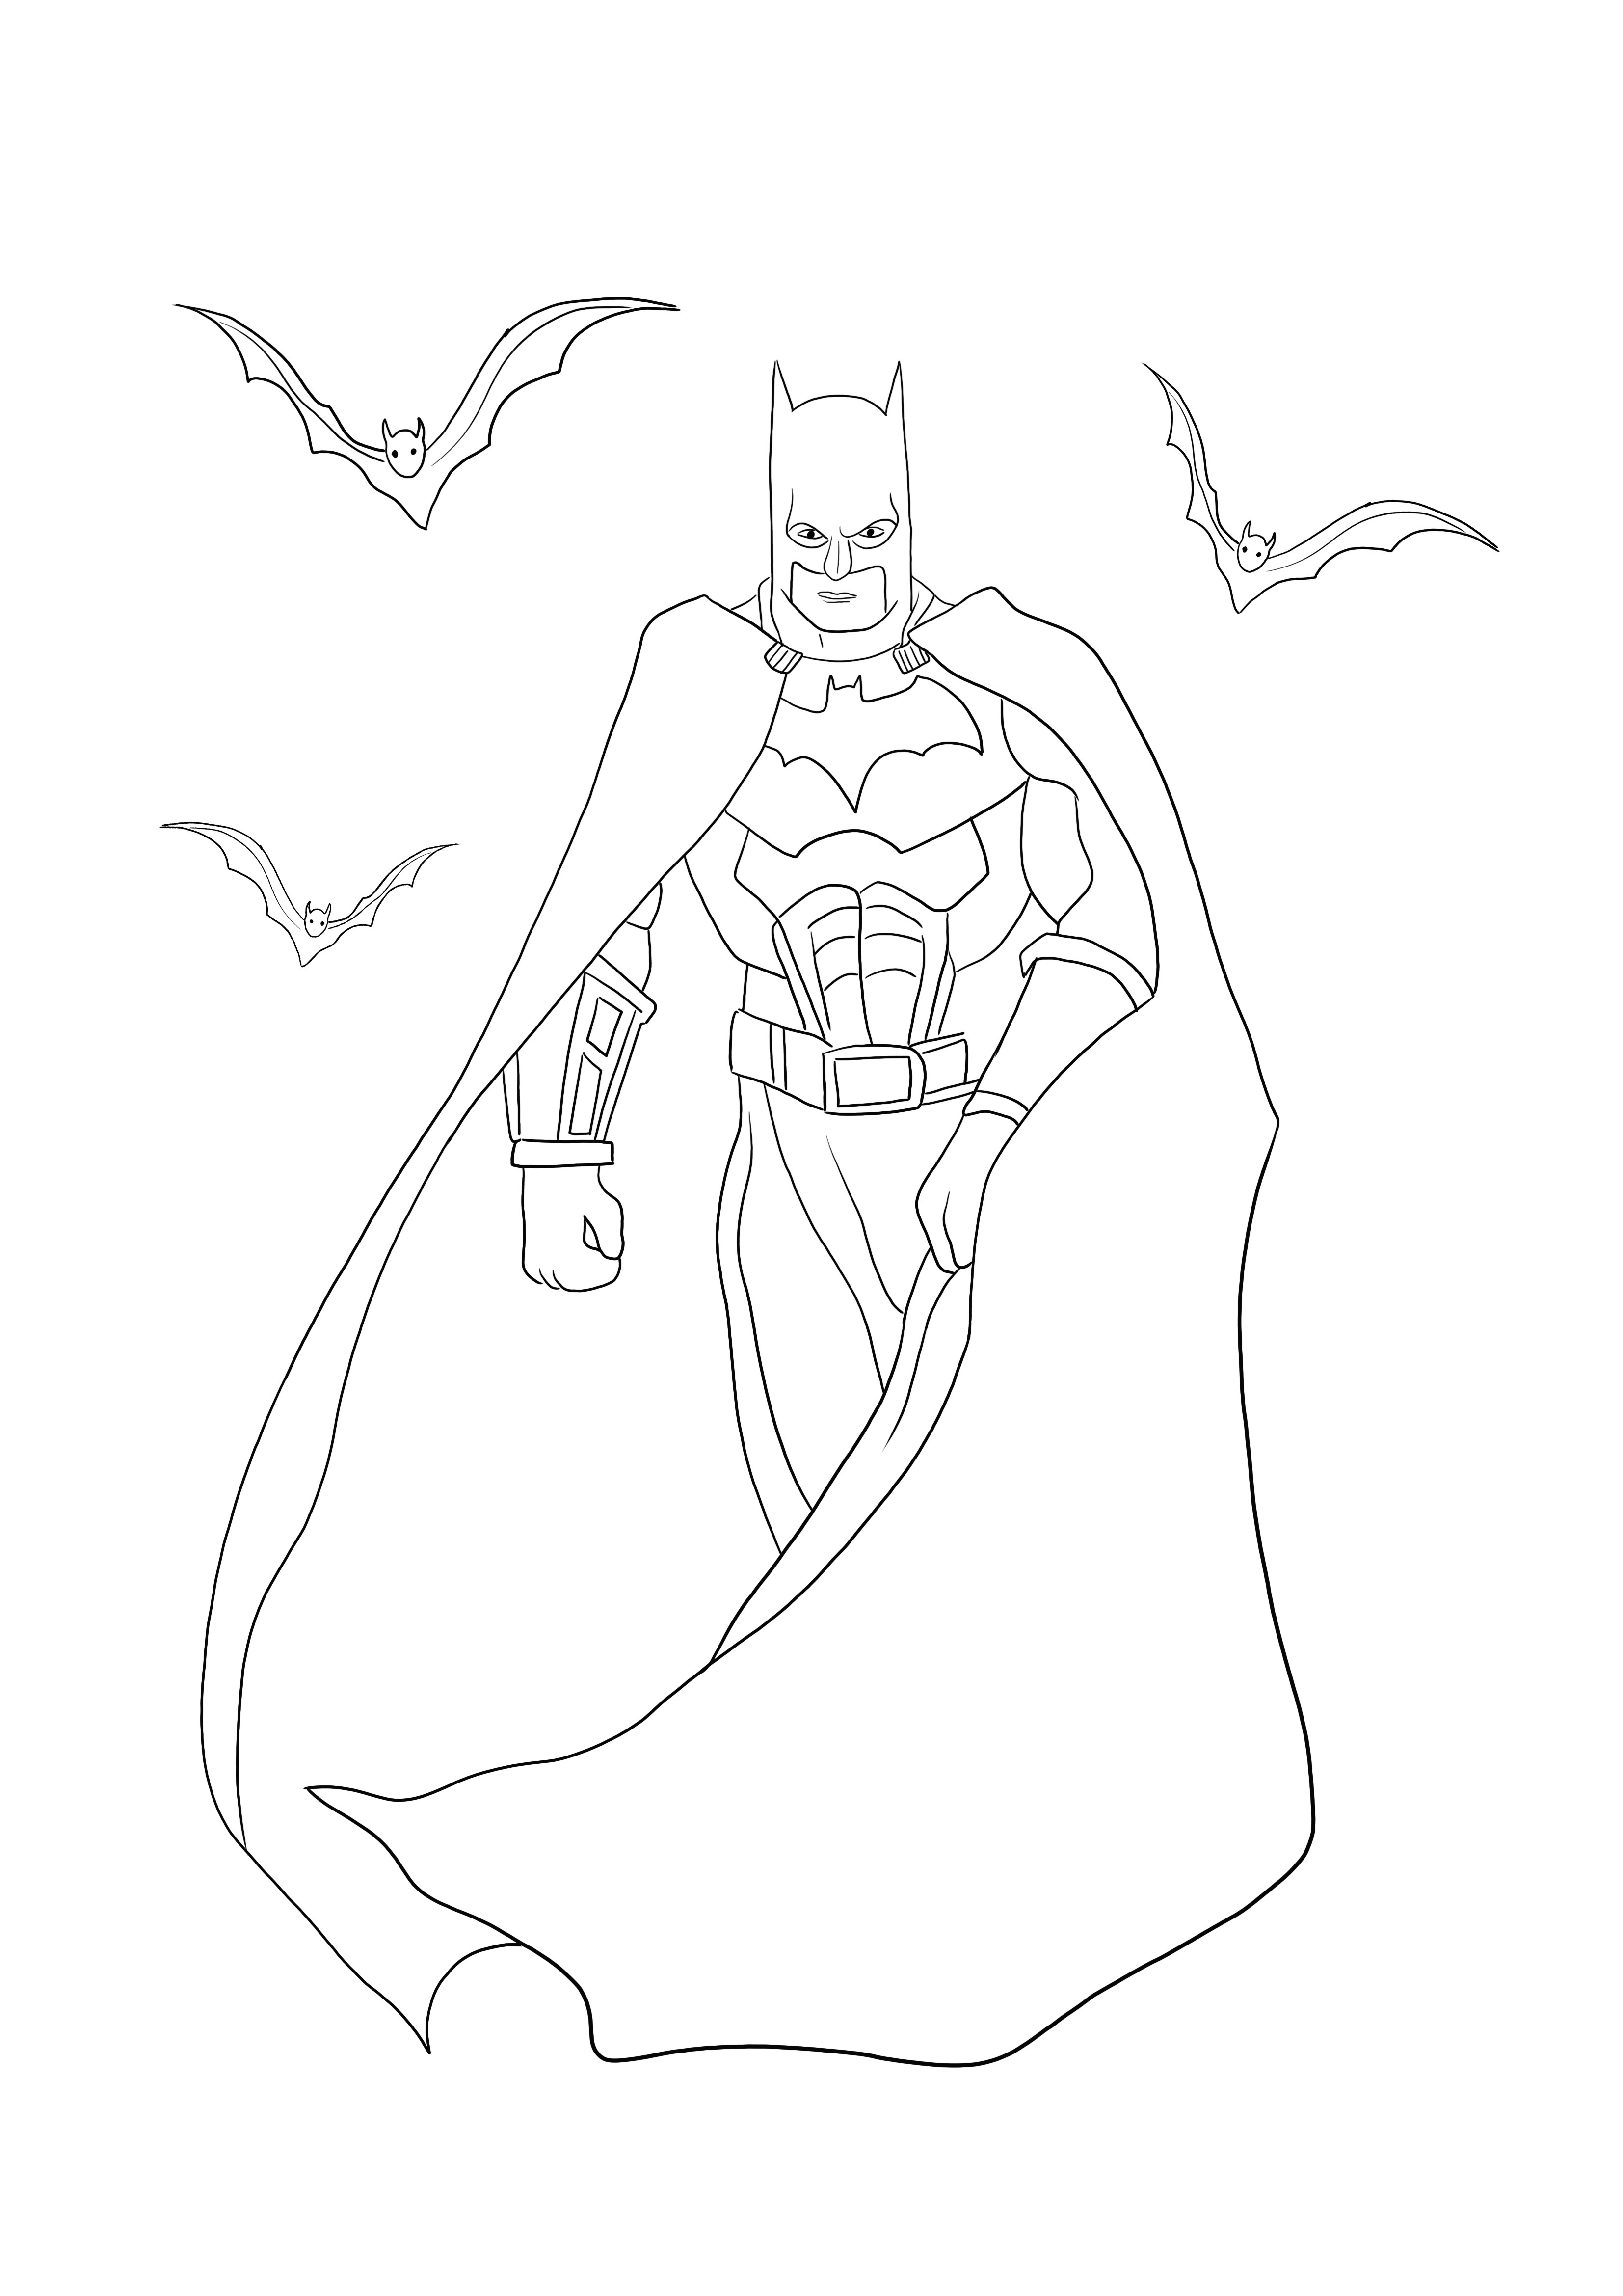 Batman with Bats coloring page is free to be downloaded or printed to have fun